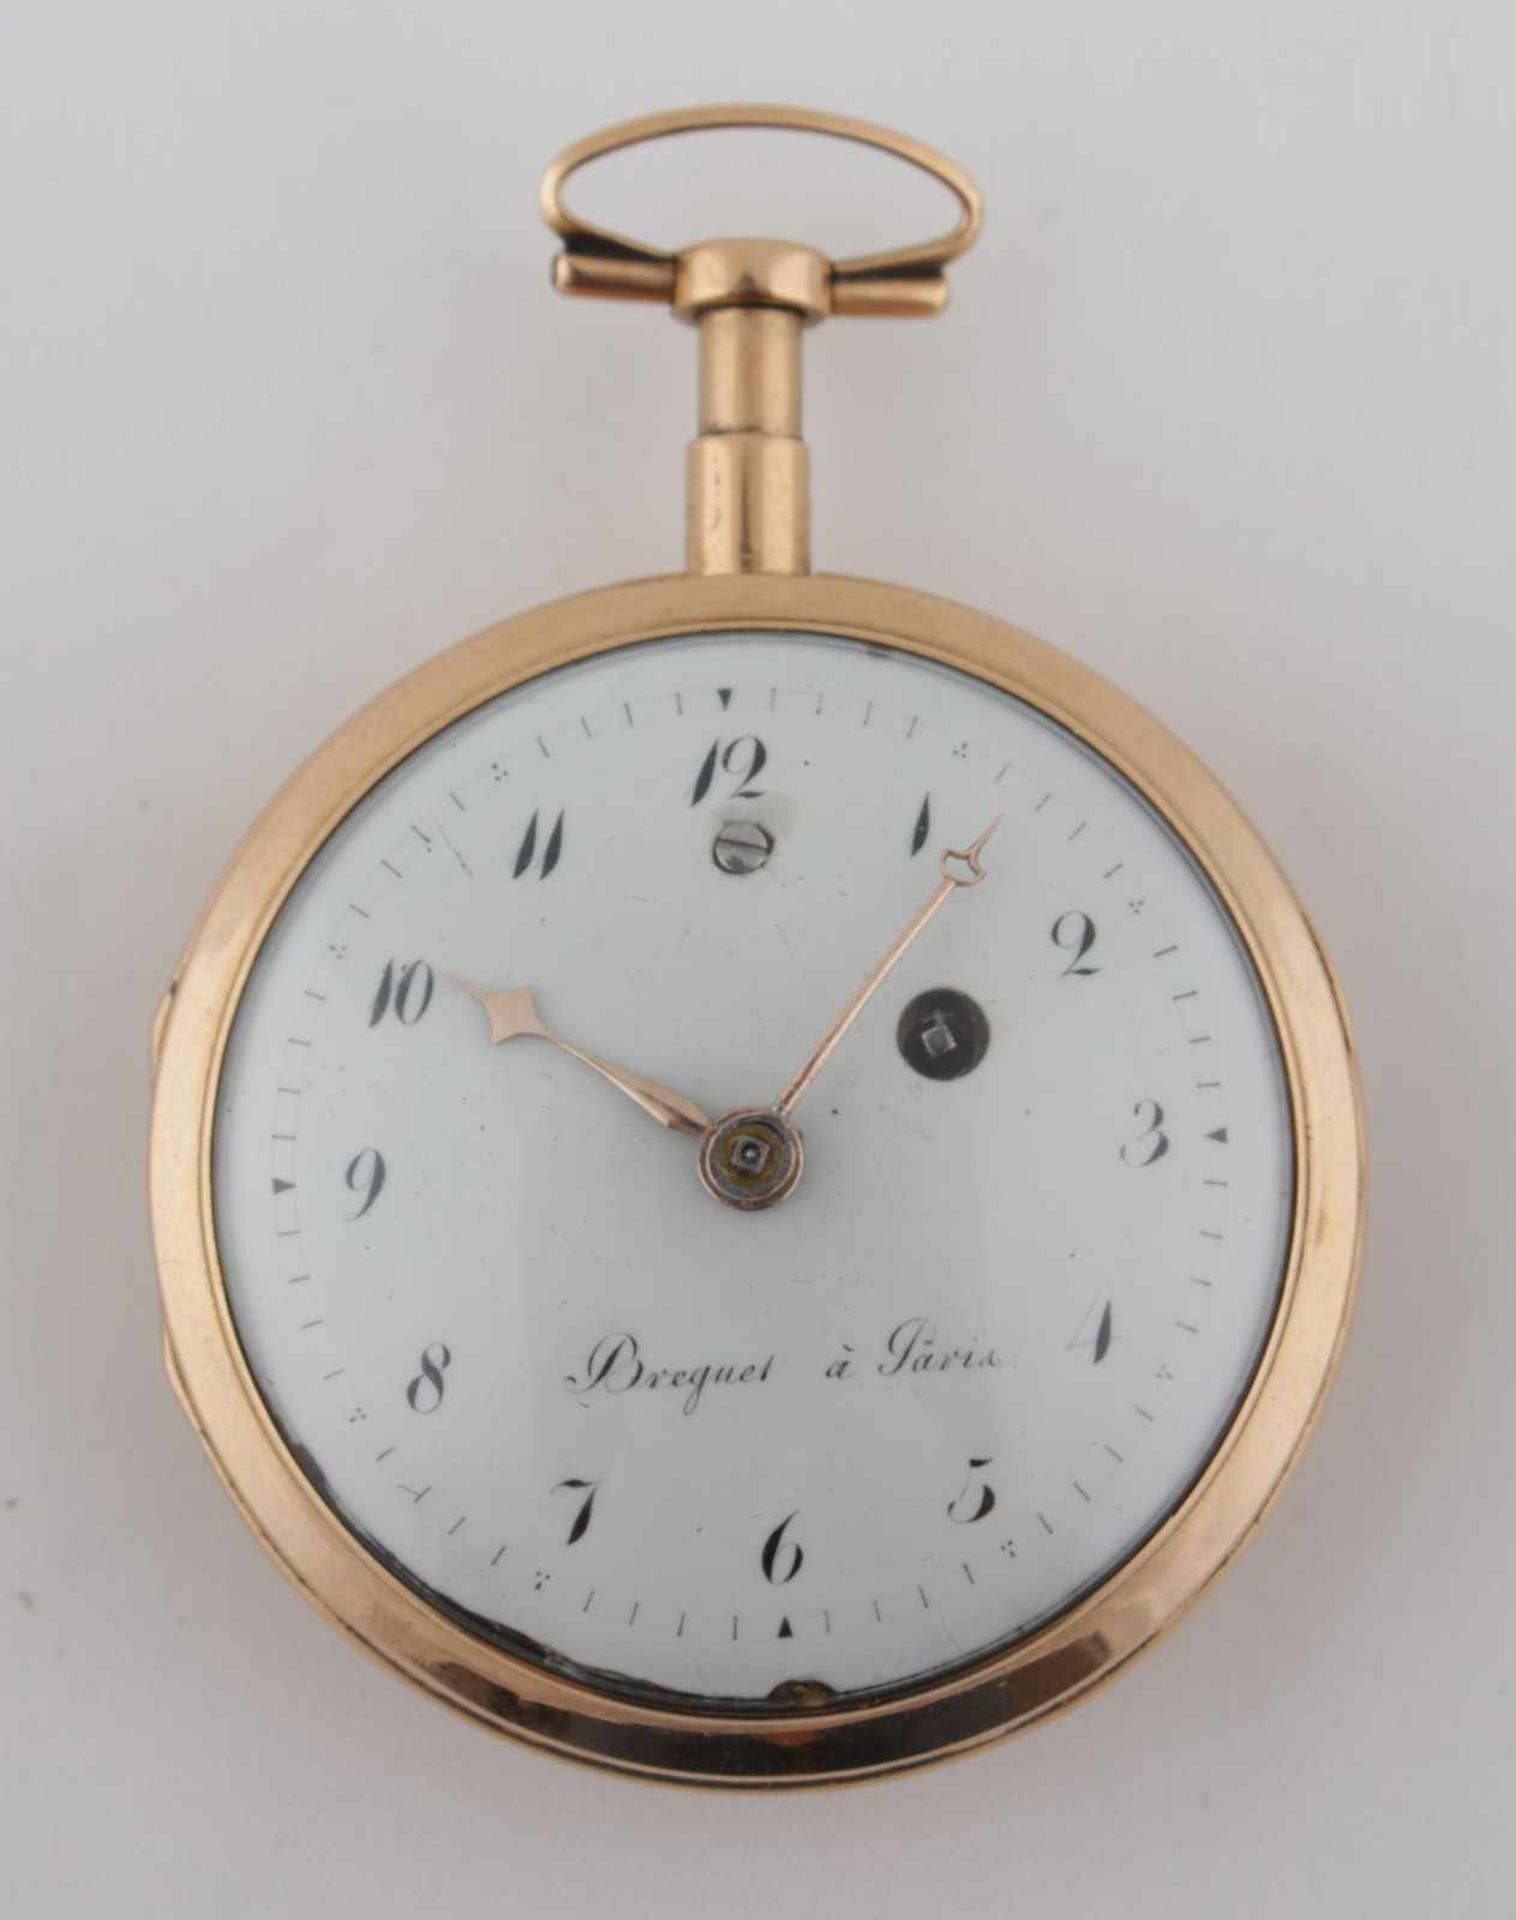 Gold repeater pocket watch labeled Breguet á Paris France, labeled Breguet, 1st half of the 19th